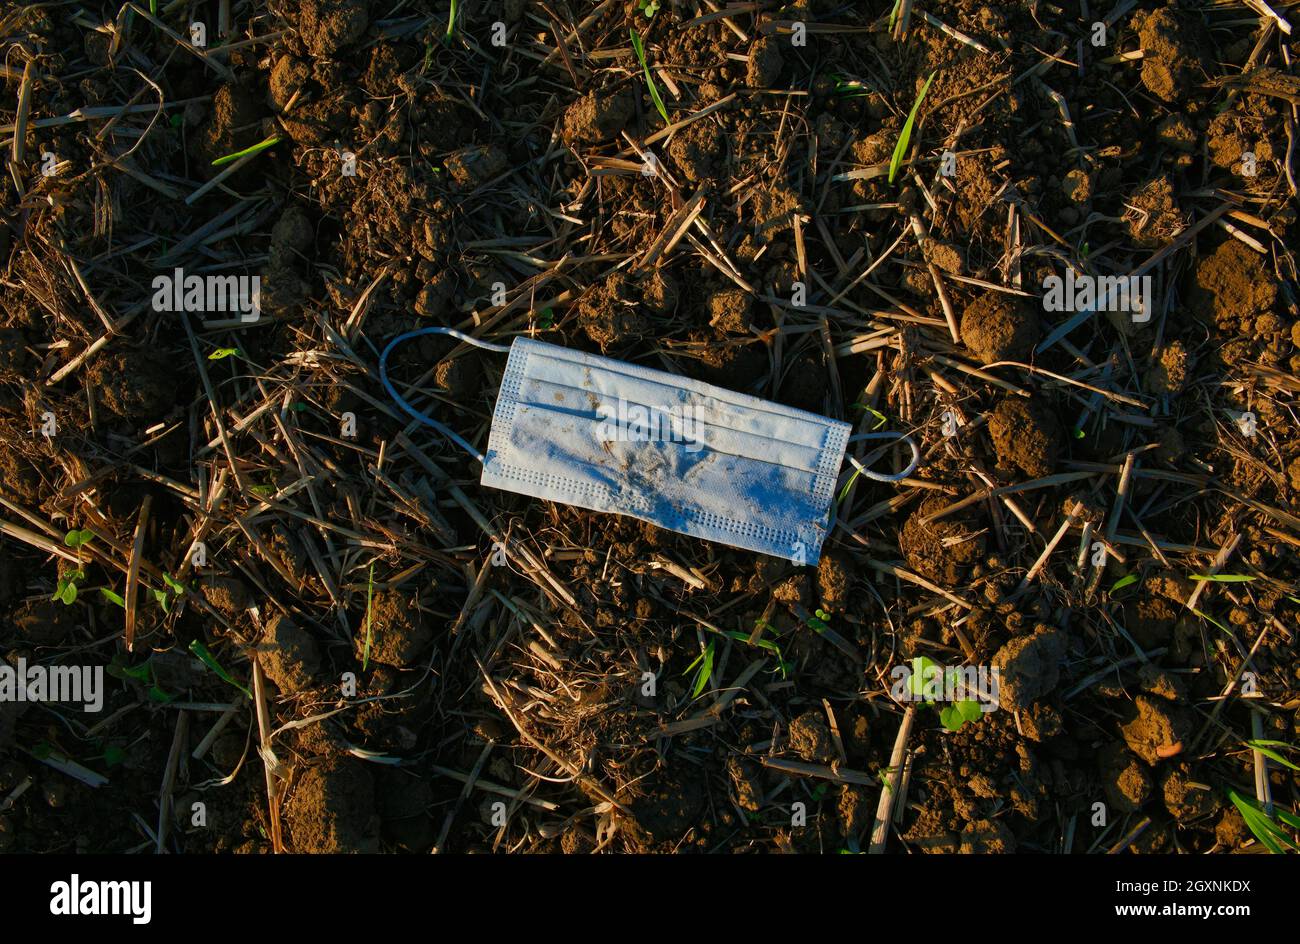 Discarded mouth mask lies on soil, loess soil, arable furrow, symbolic image Impact of the Corona pandemic on agricultural economy, Corona crisis Stock Photo